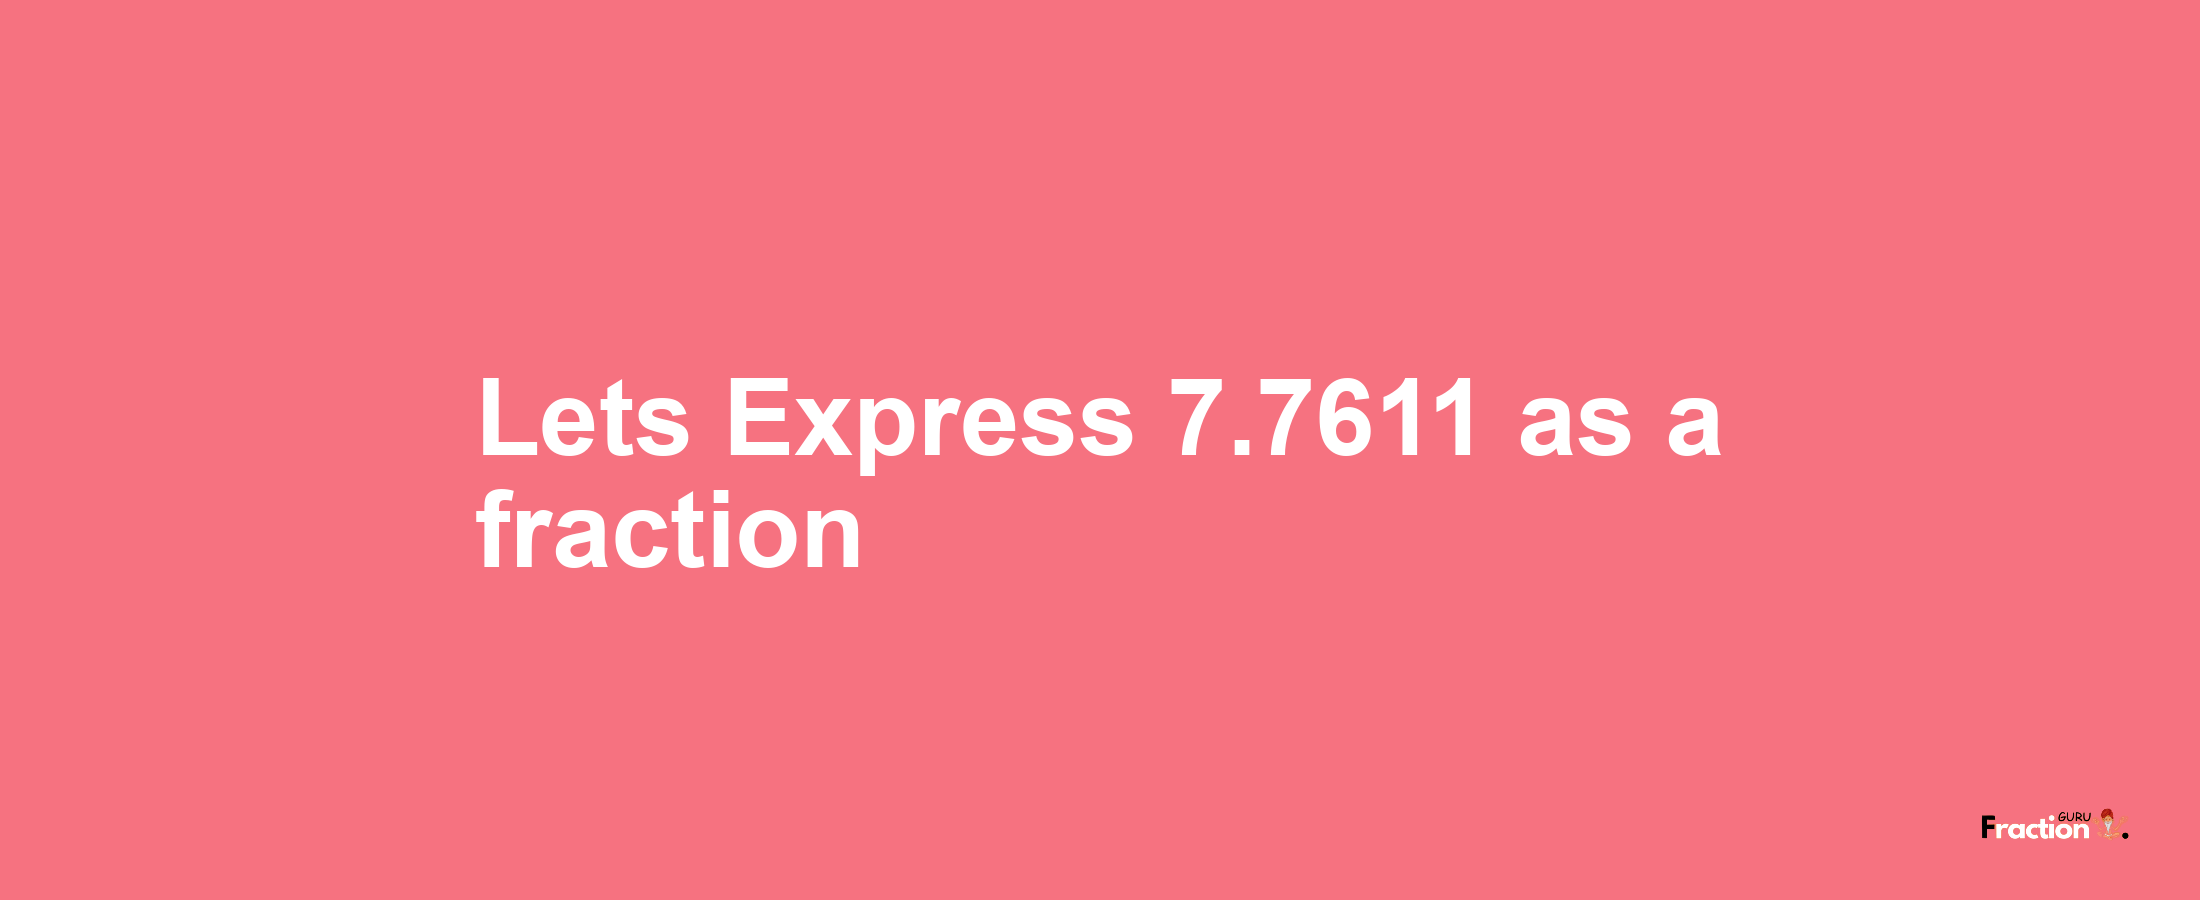 Lets Express 7.7611 as afraction